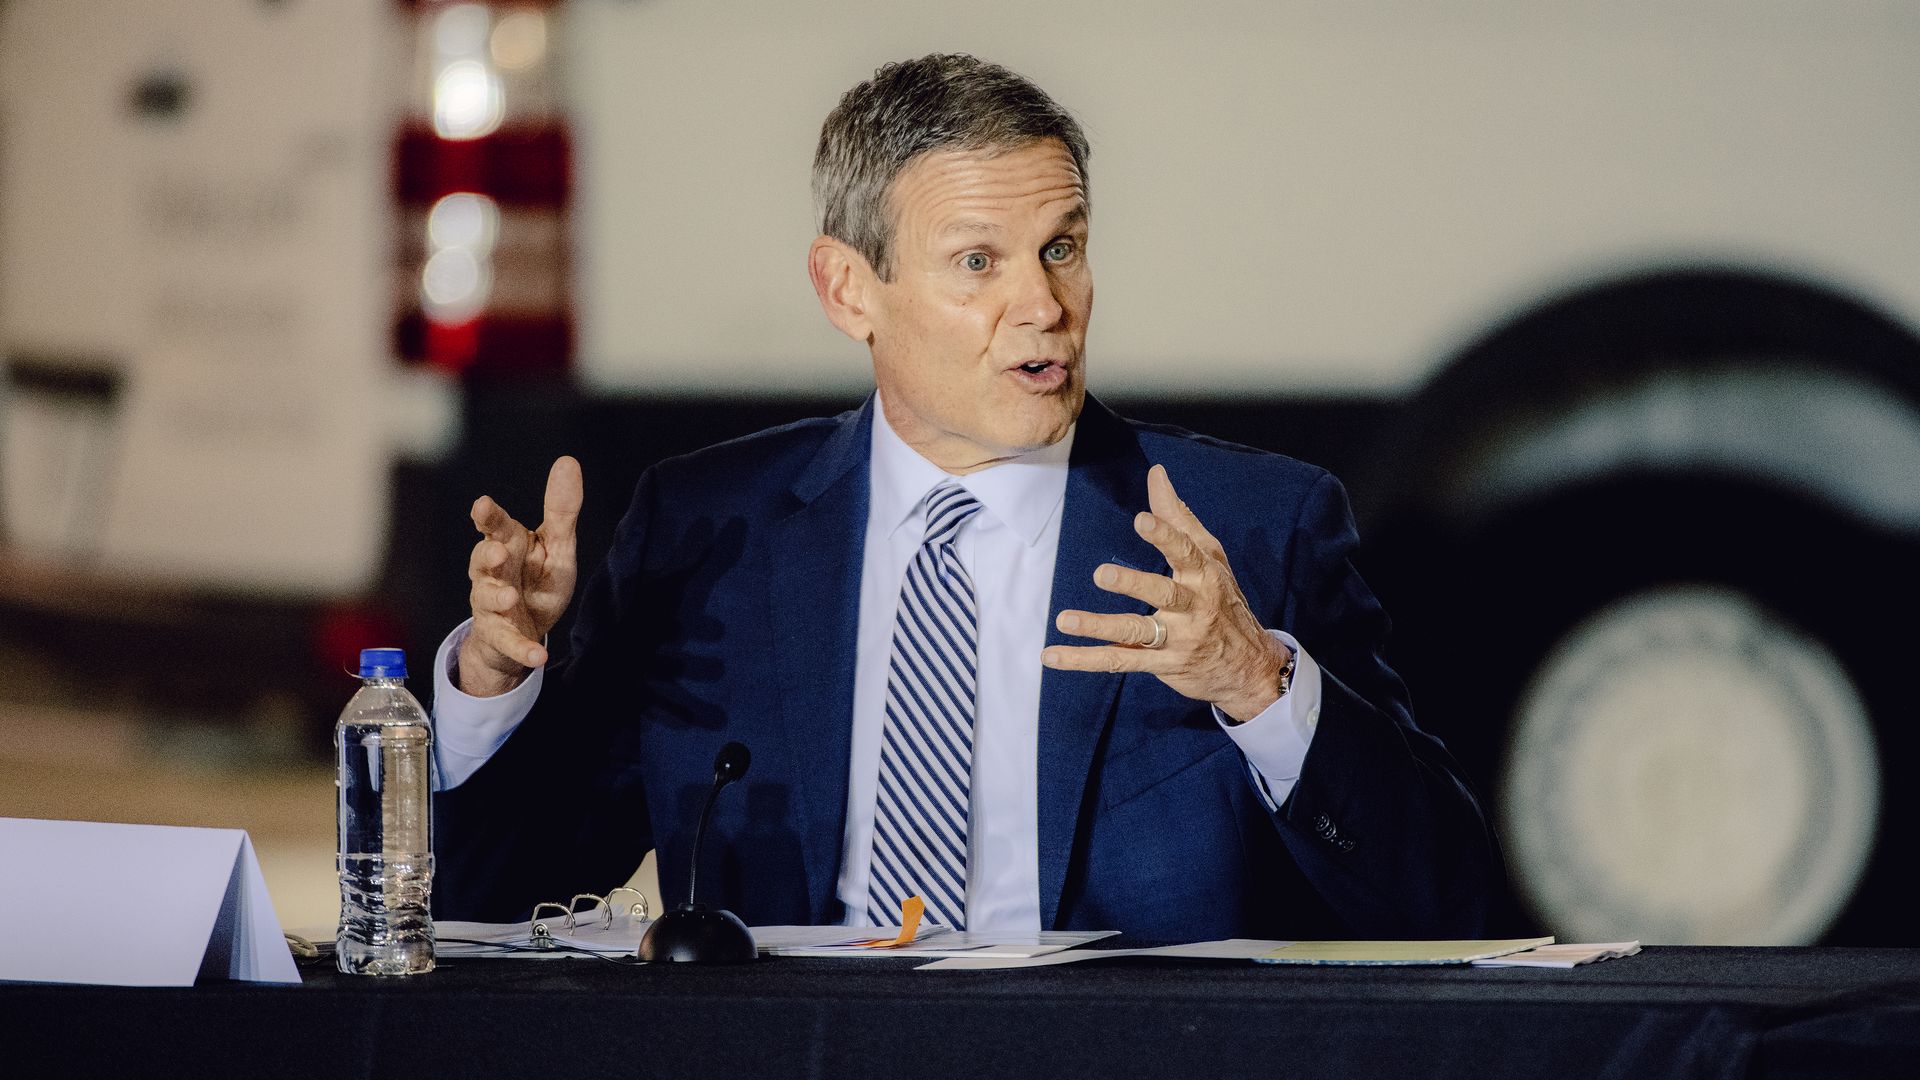 Tennessee Gov. Bill Lee speaking at a CDC roundtable in December 2020.